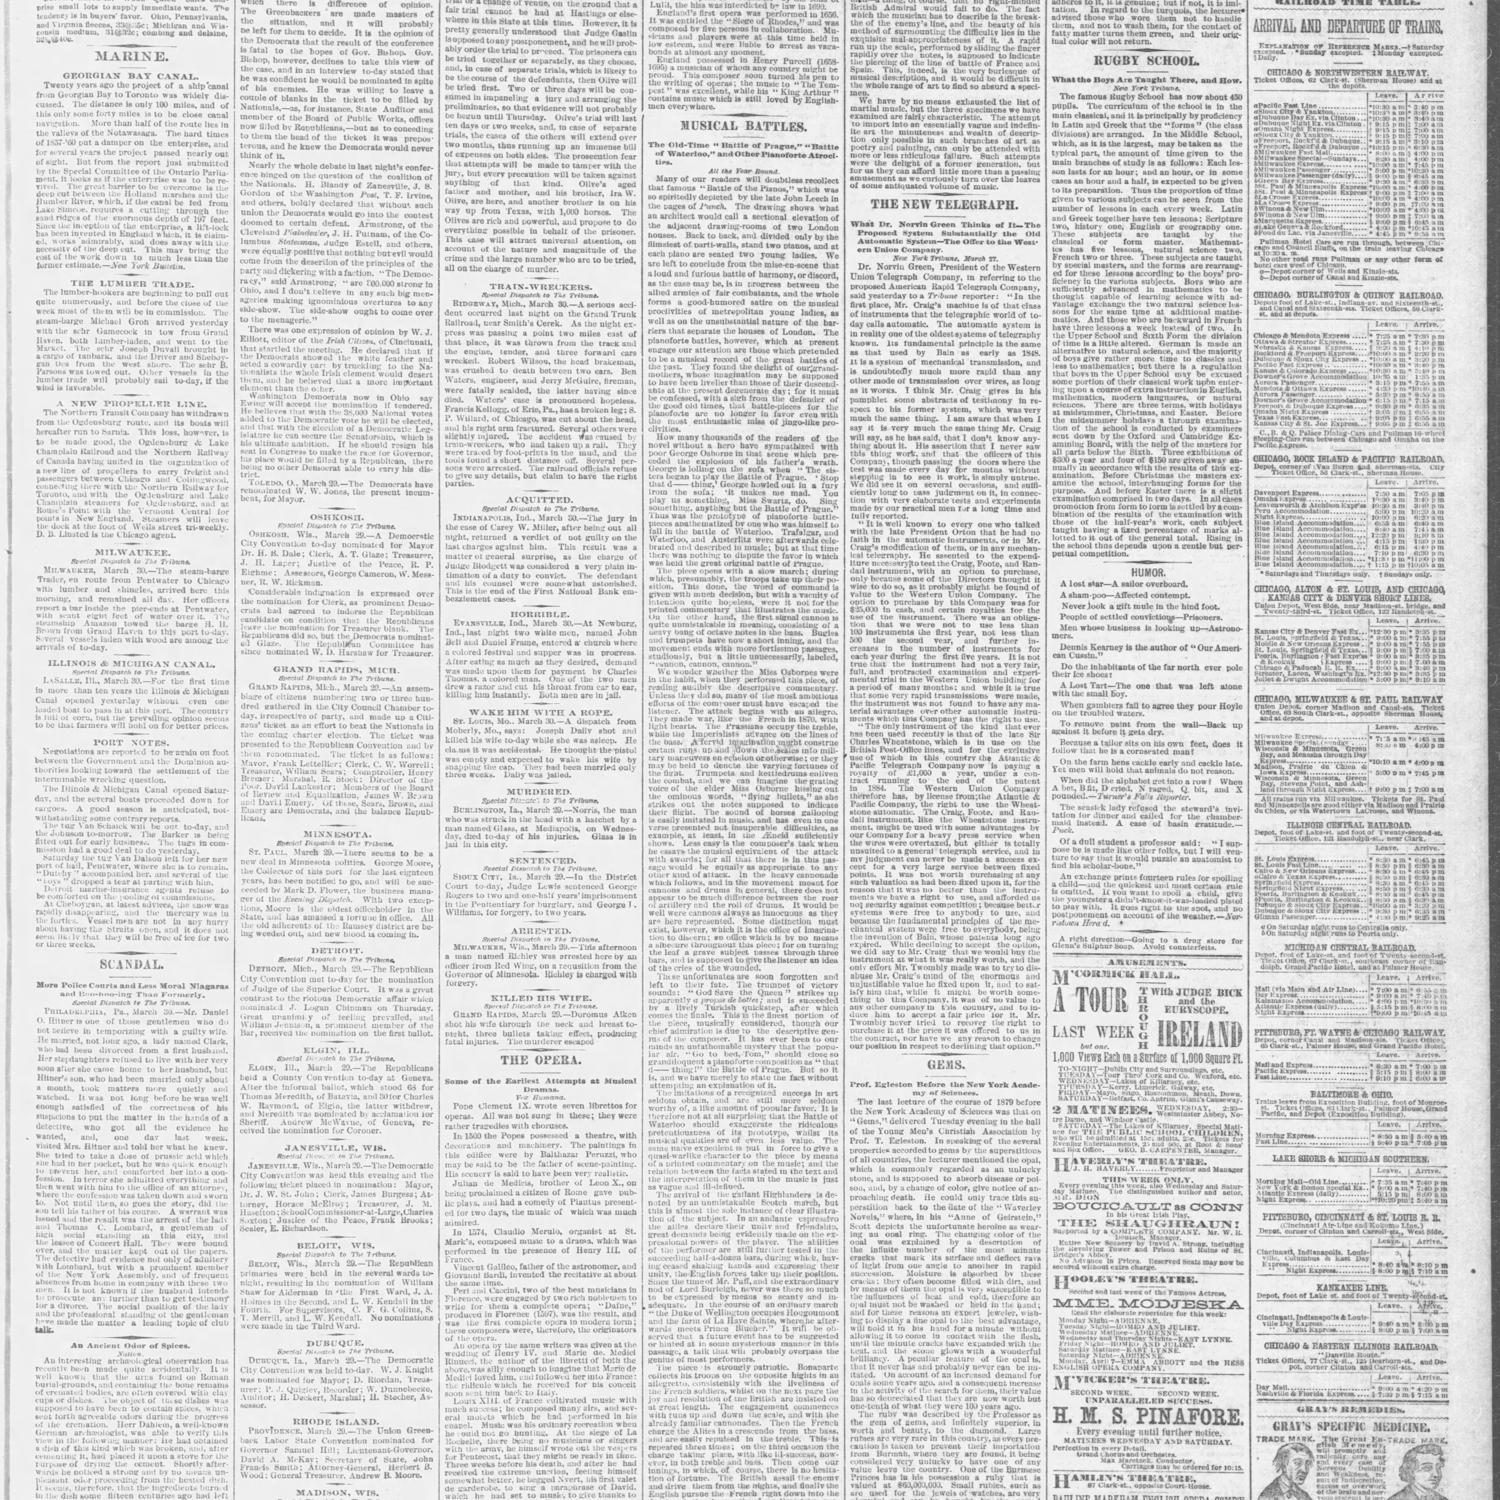 The Chicago Tribune, 1879-03-31, page 7